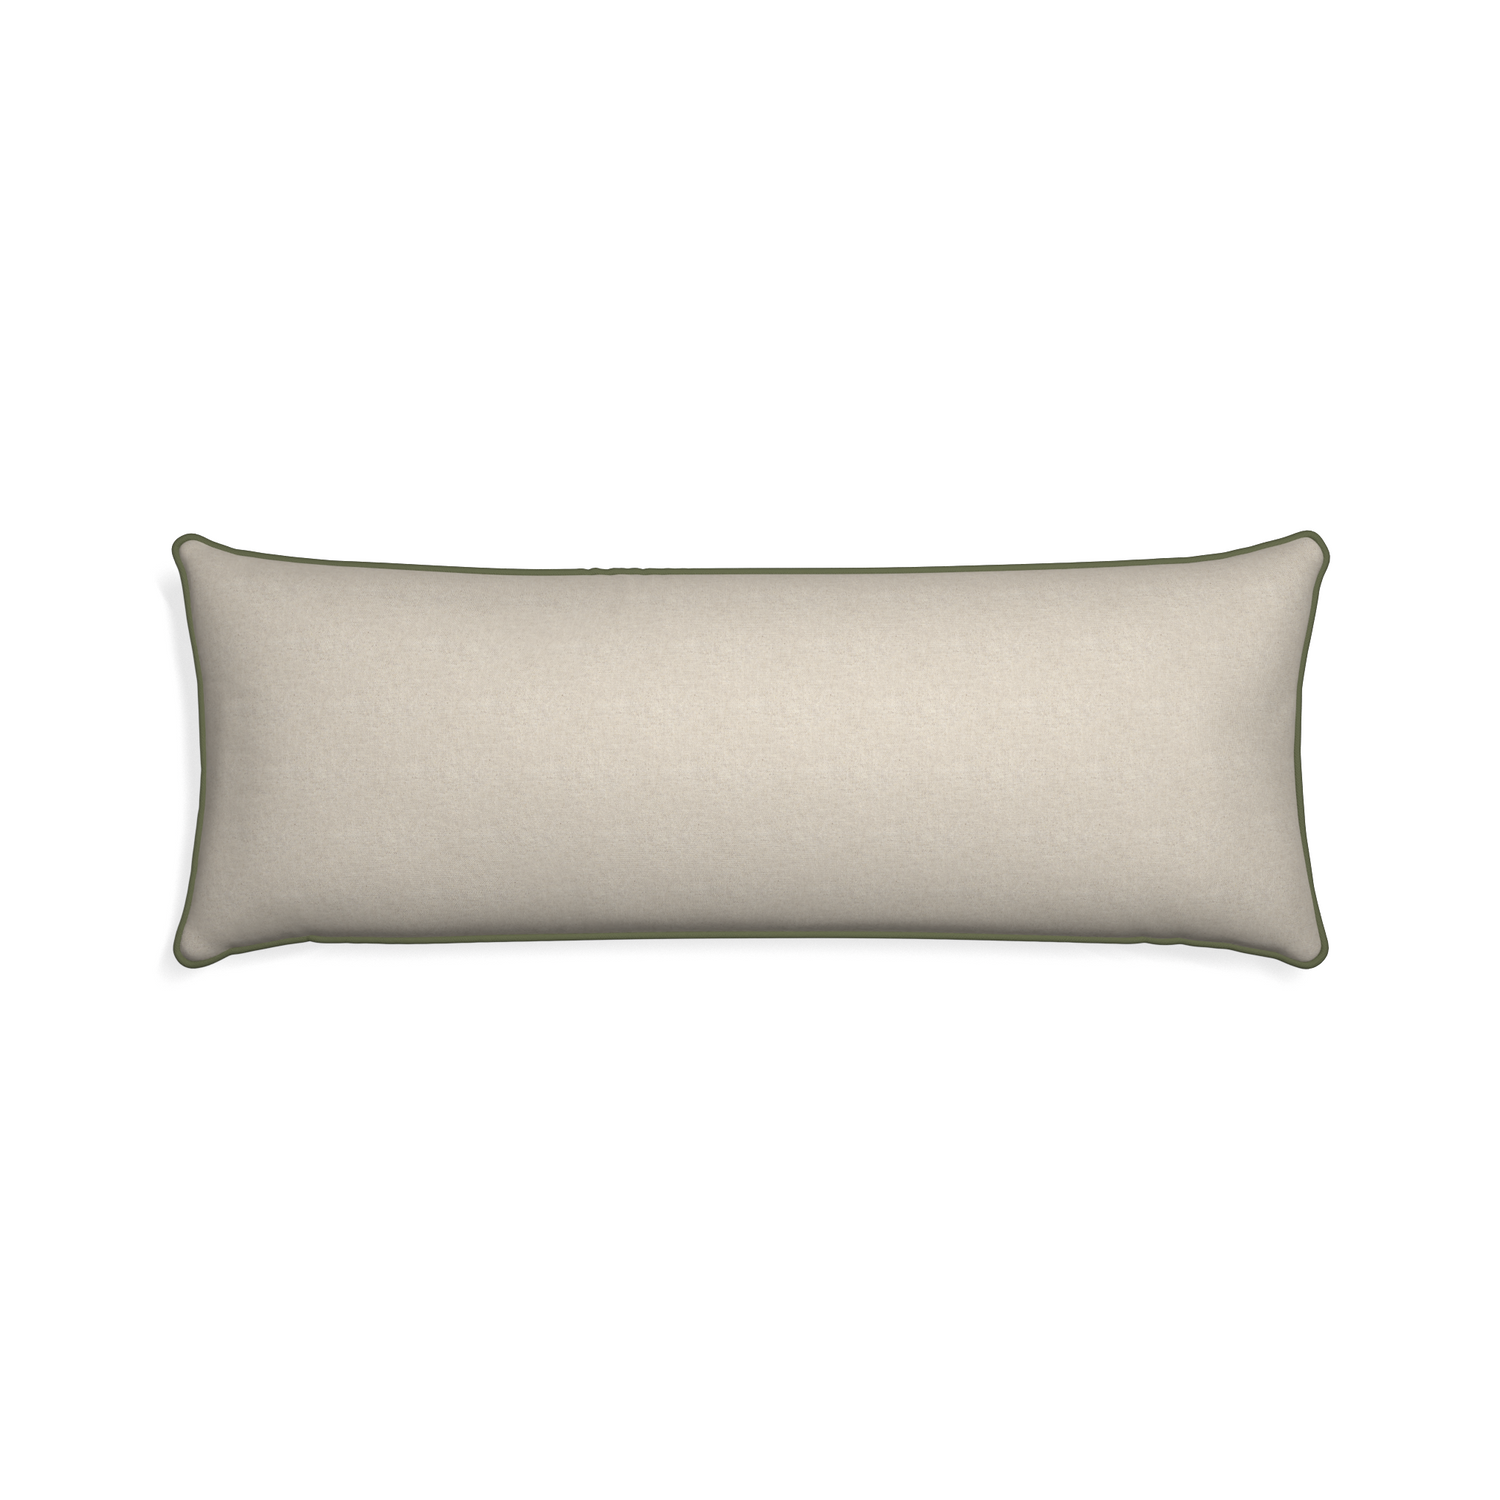 Xl-lumbar oat custom pillow with f piping on white background